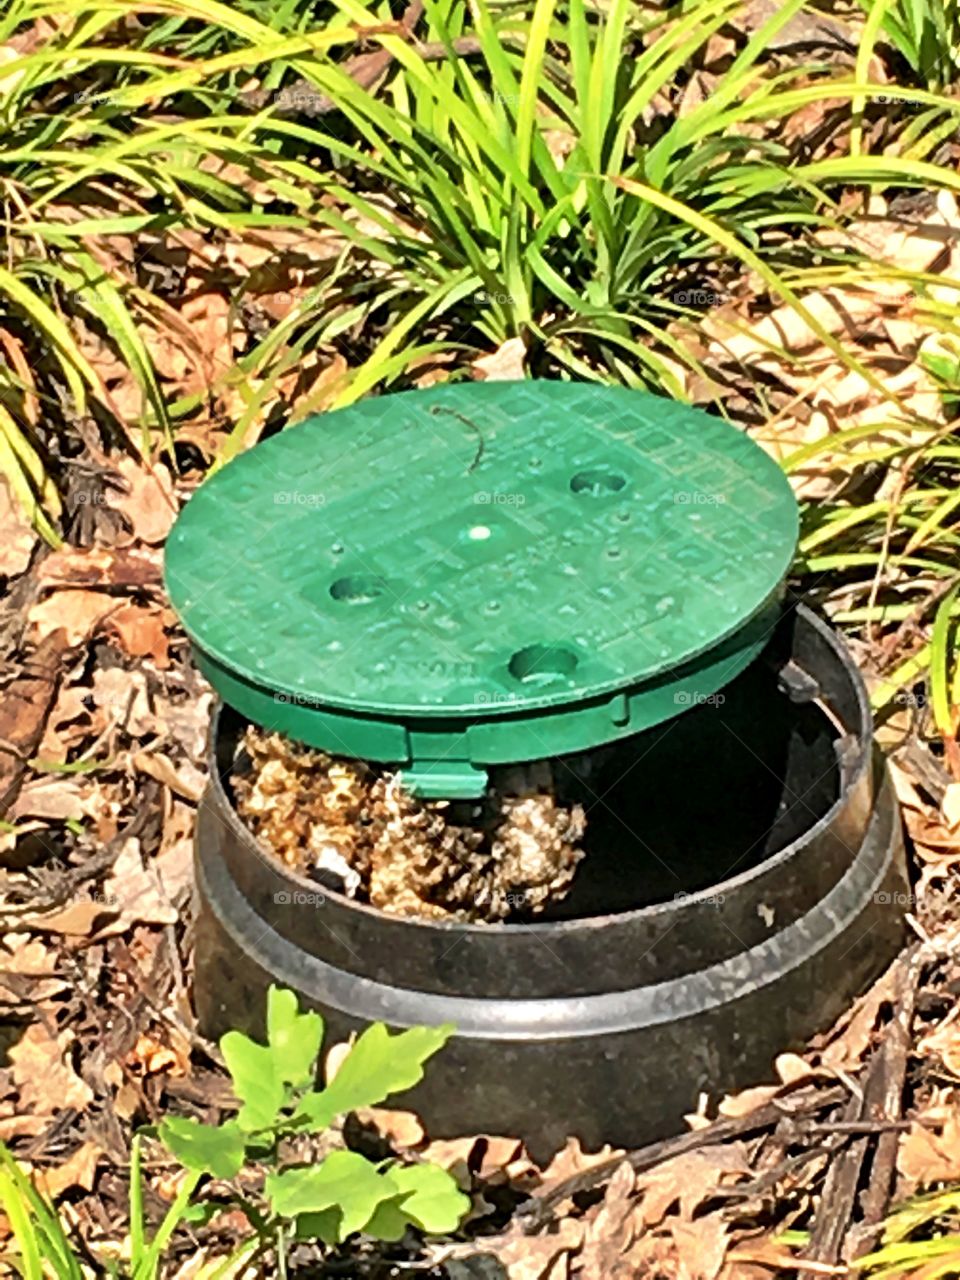 Bee hive in water pipe cover